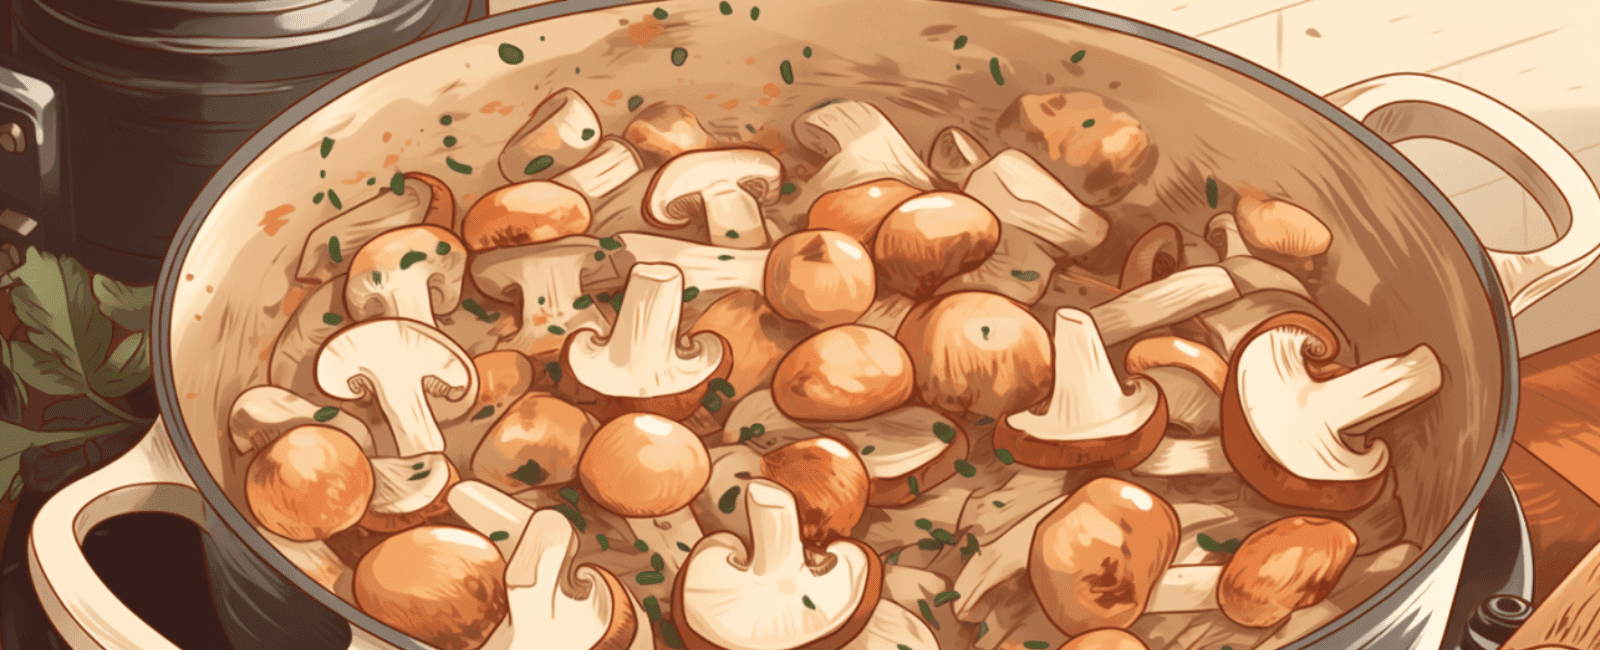 A Beginner's Guide to Cooking Mushrooms